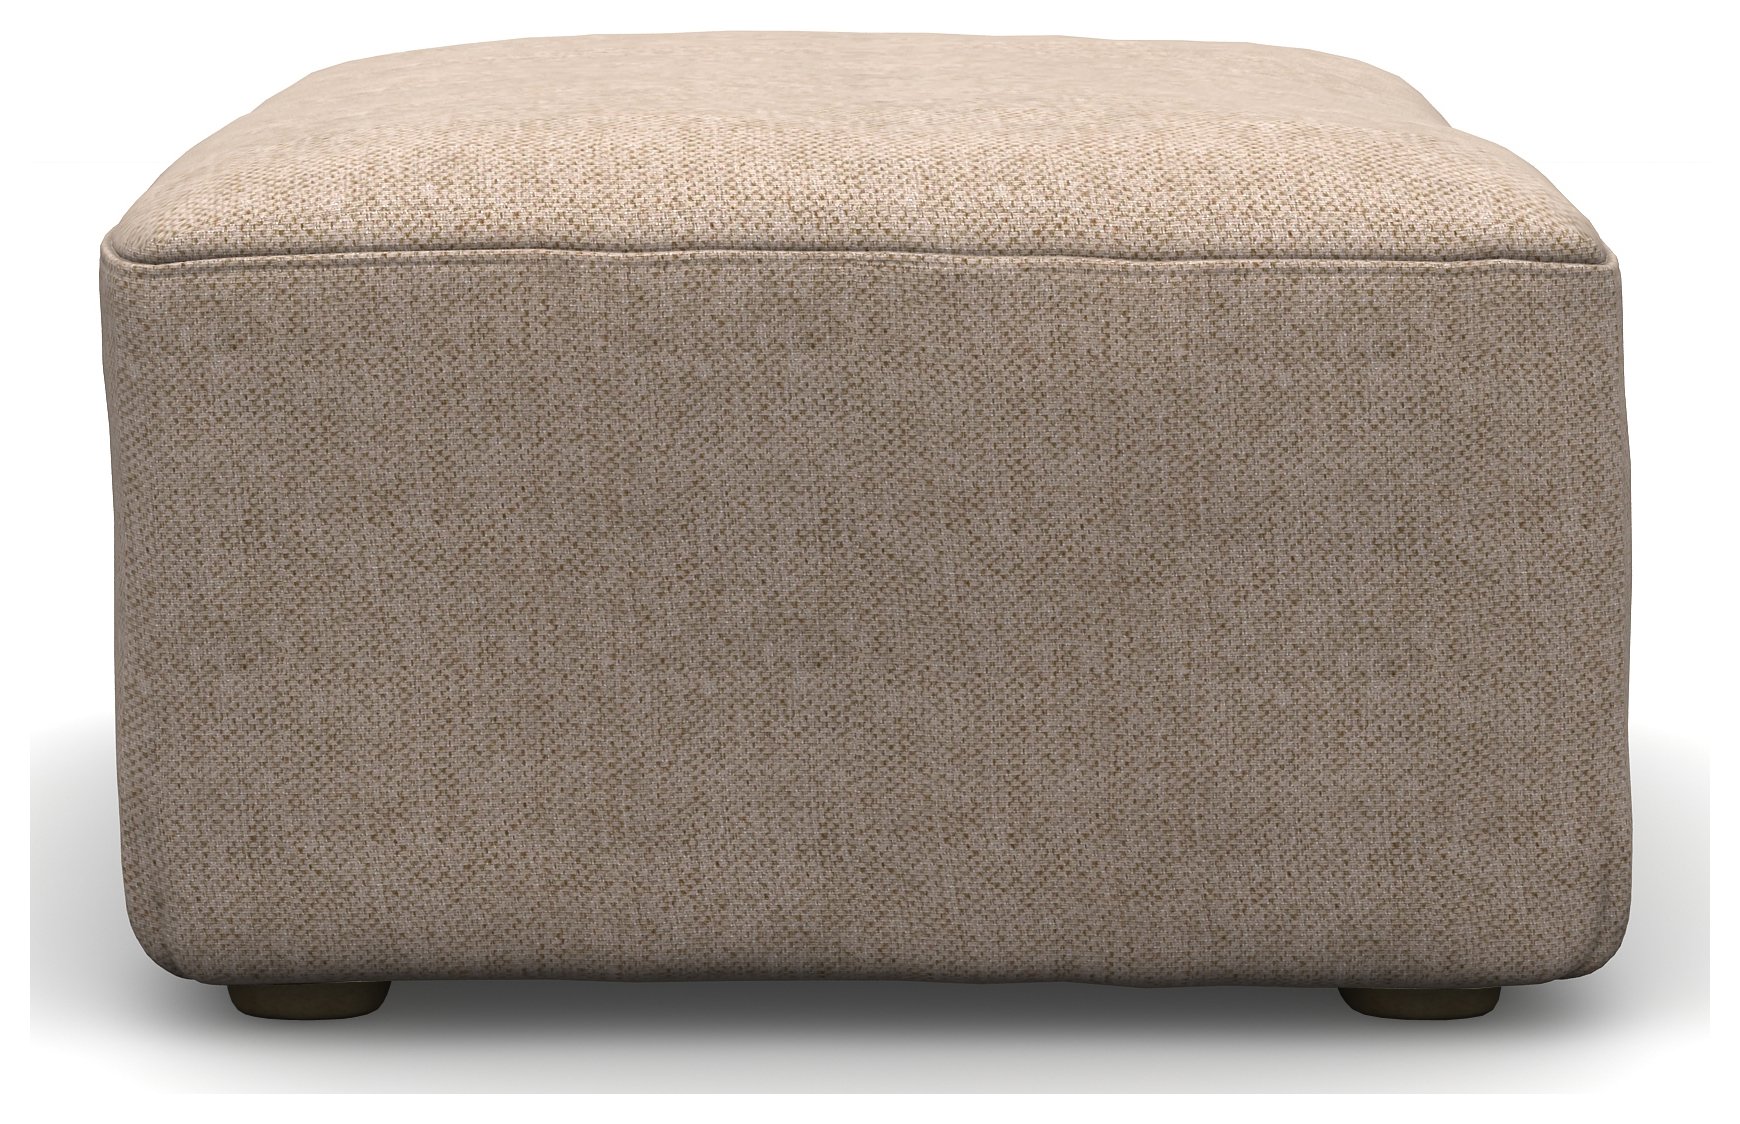 Heart of House Lucas Fabric Footstool - Beige. Review